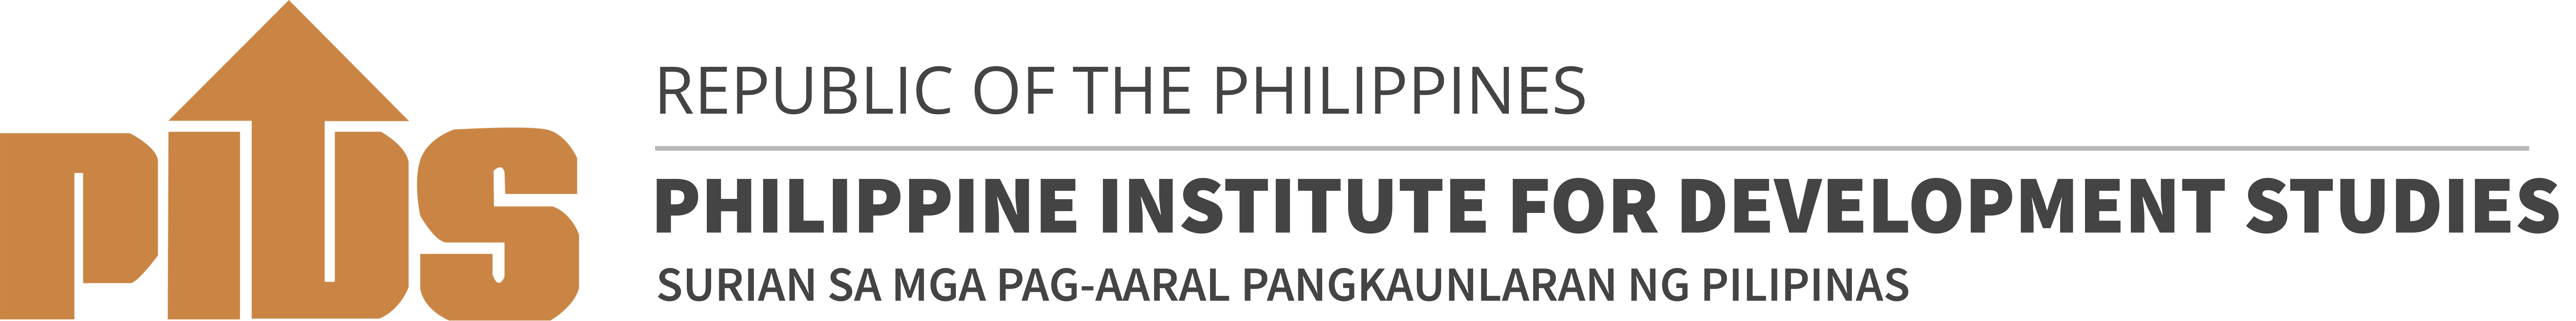 research paper on federalism in the philippines pdf